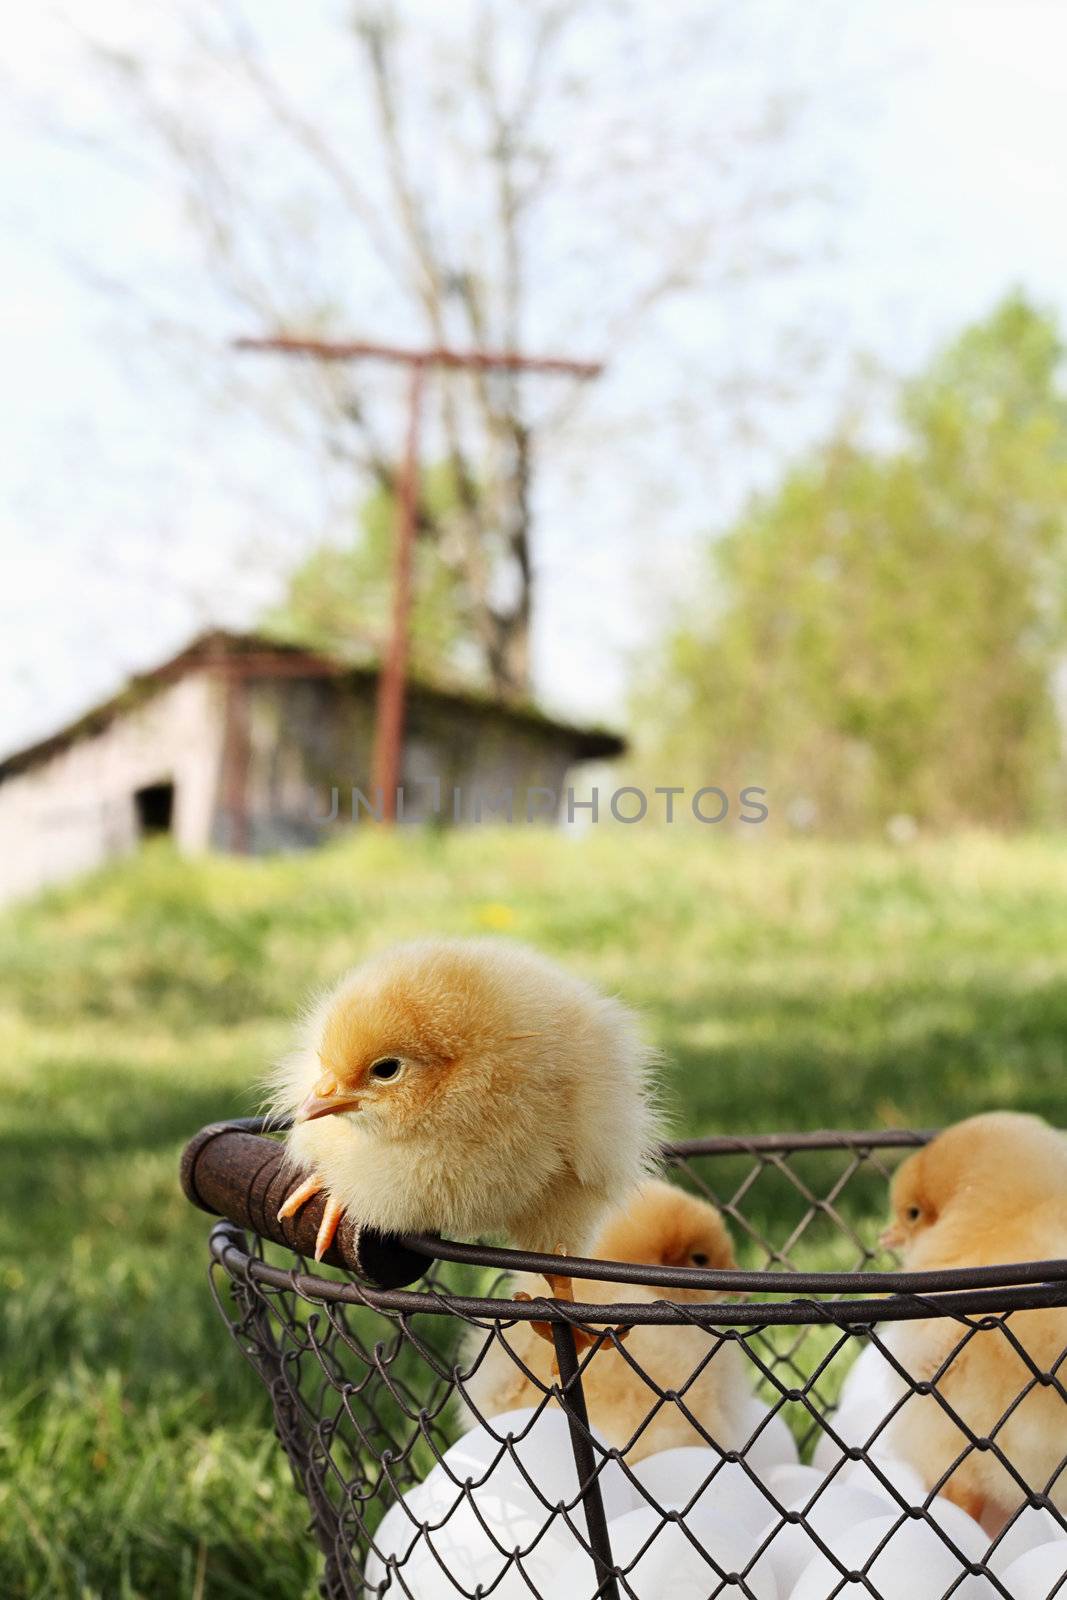 Little Buff Orpington chicks sitting on top of an egg basket with chicken coop in far background. Extreme shallow depth of field. 